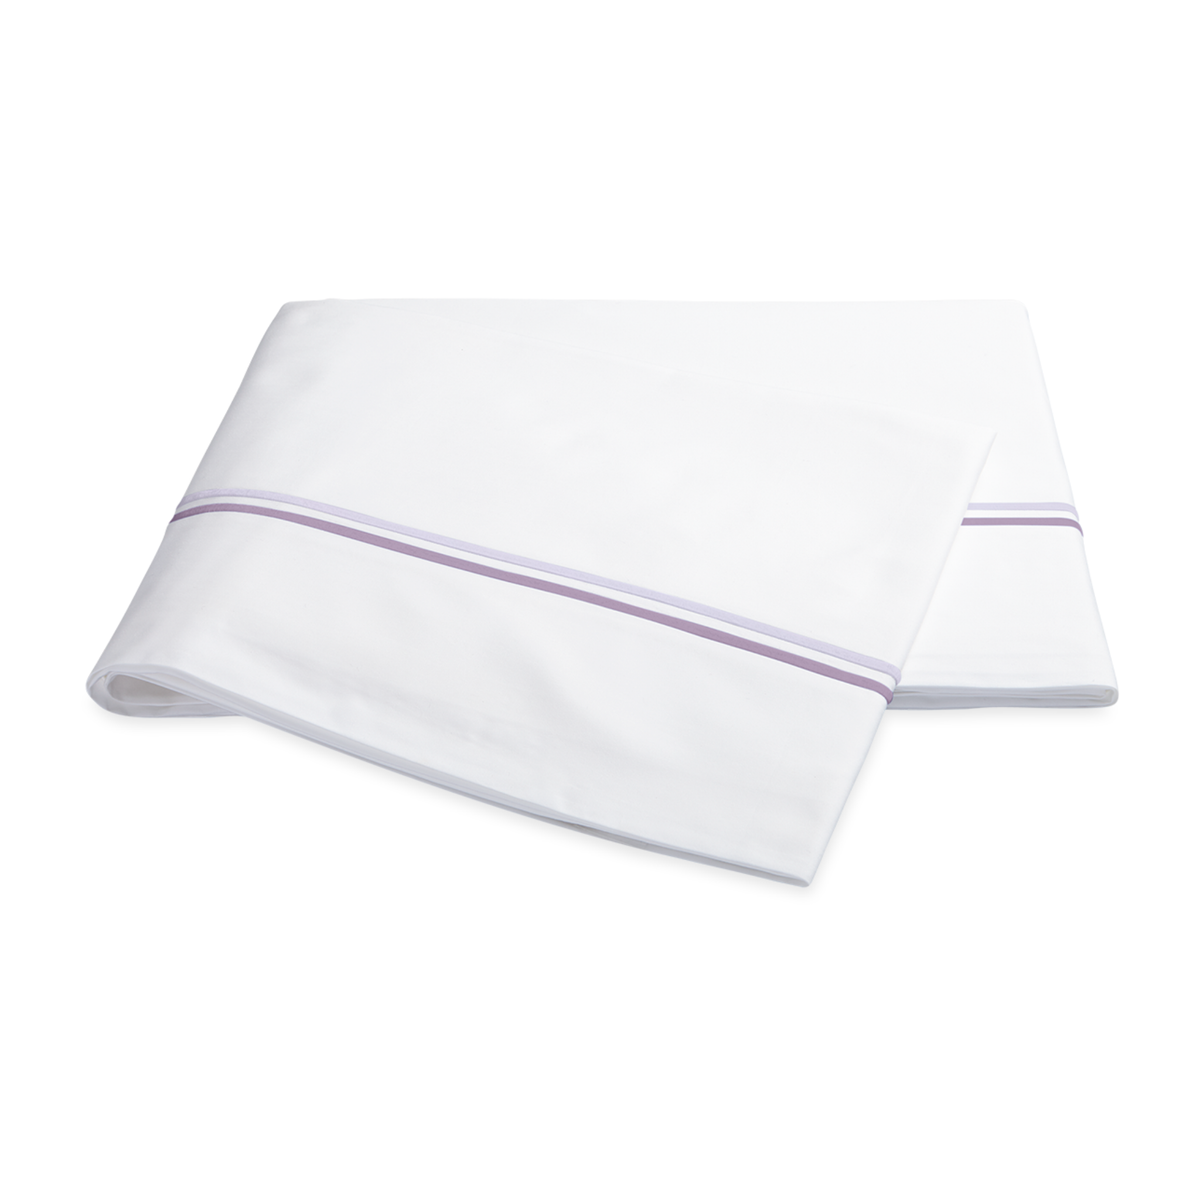 Flat Sheets in Lilac Color Matouk Essex Bedding Collection